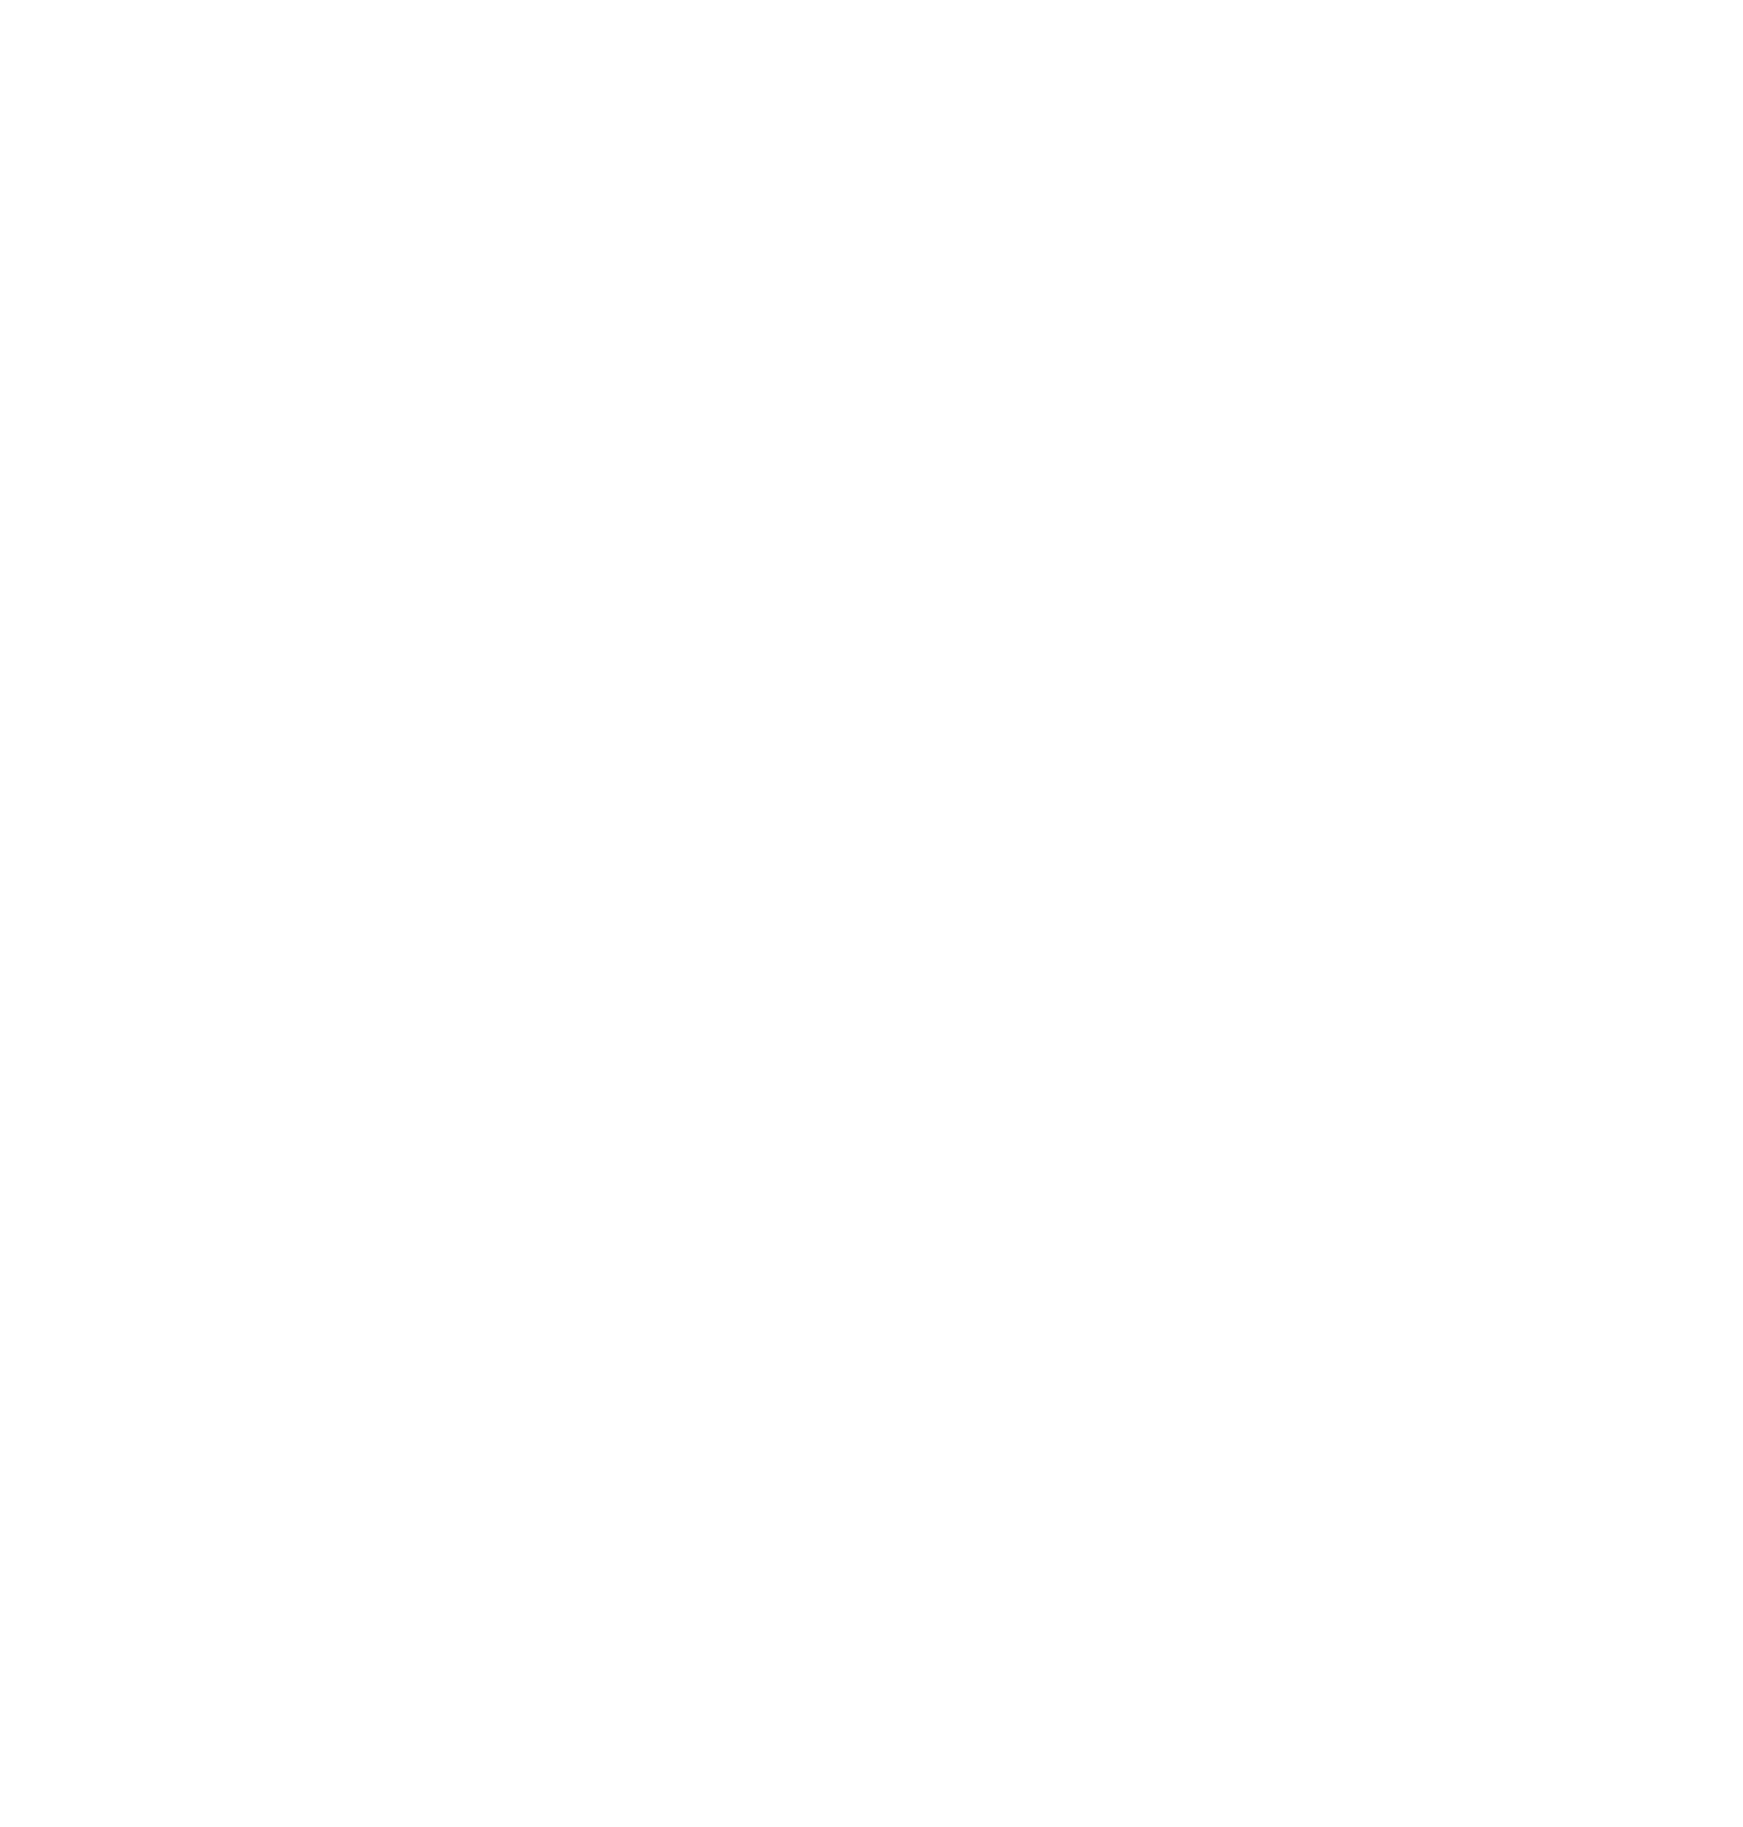 Logo for Young Wellness LLC